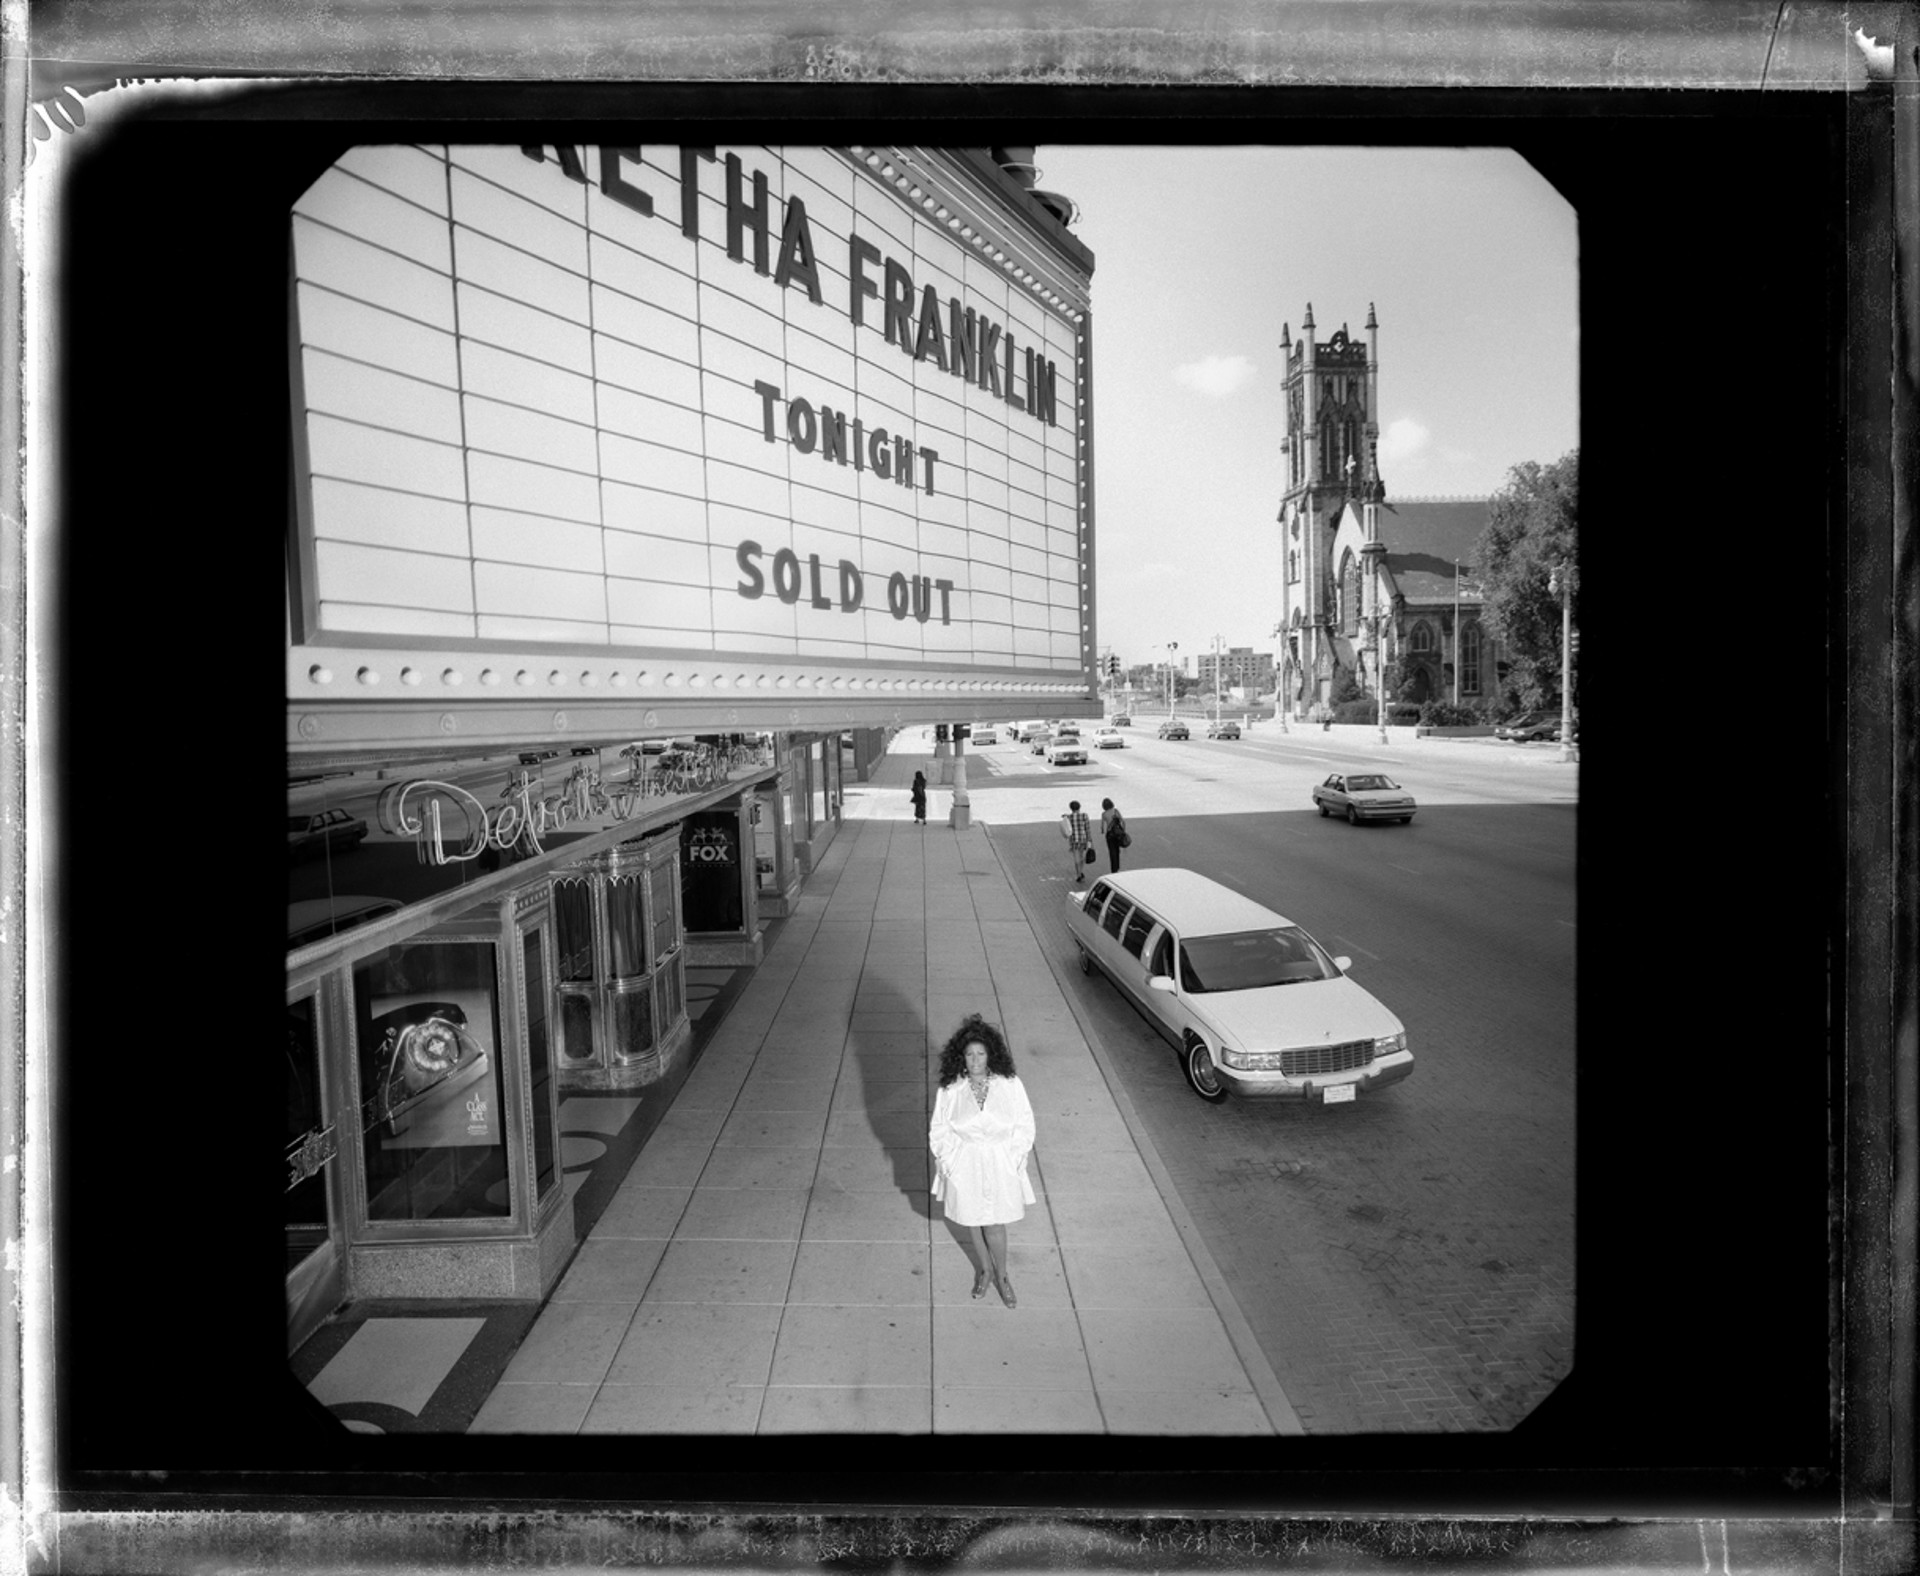 96089 Aretha Franklin Fox Theater Detroit BW by Timothy White